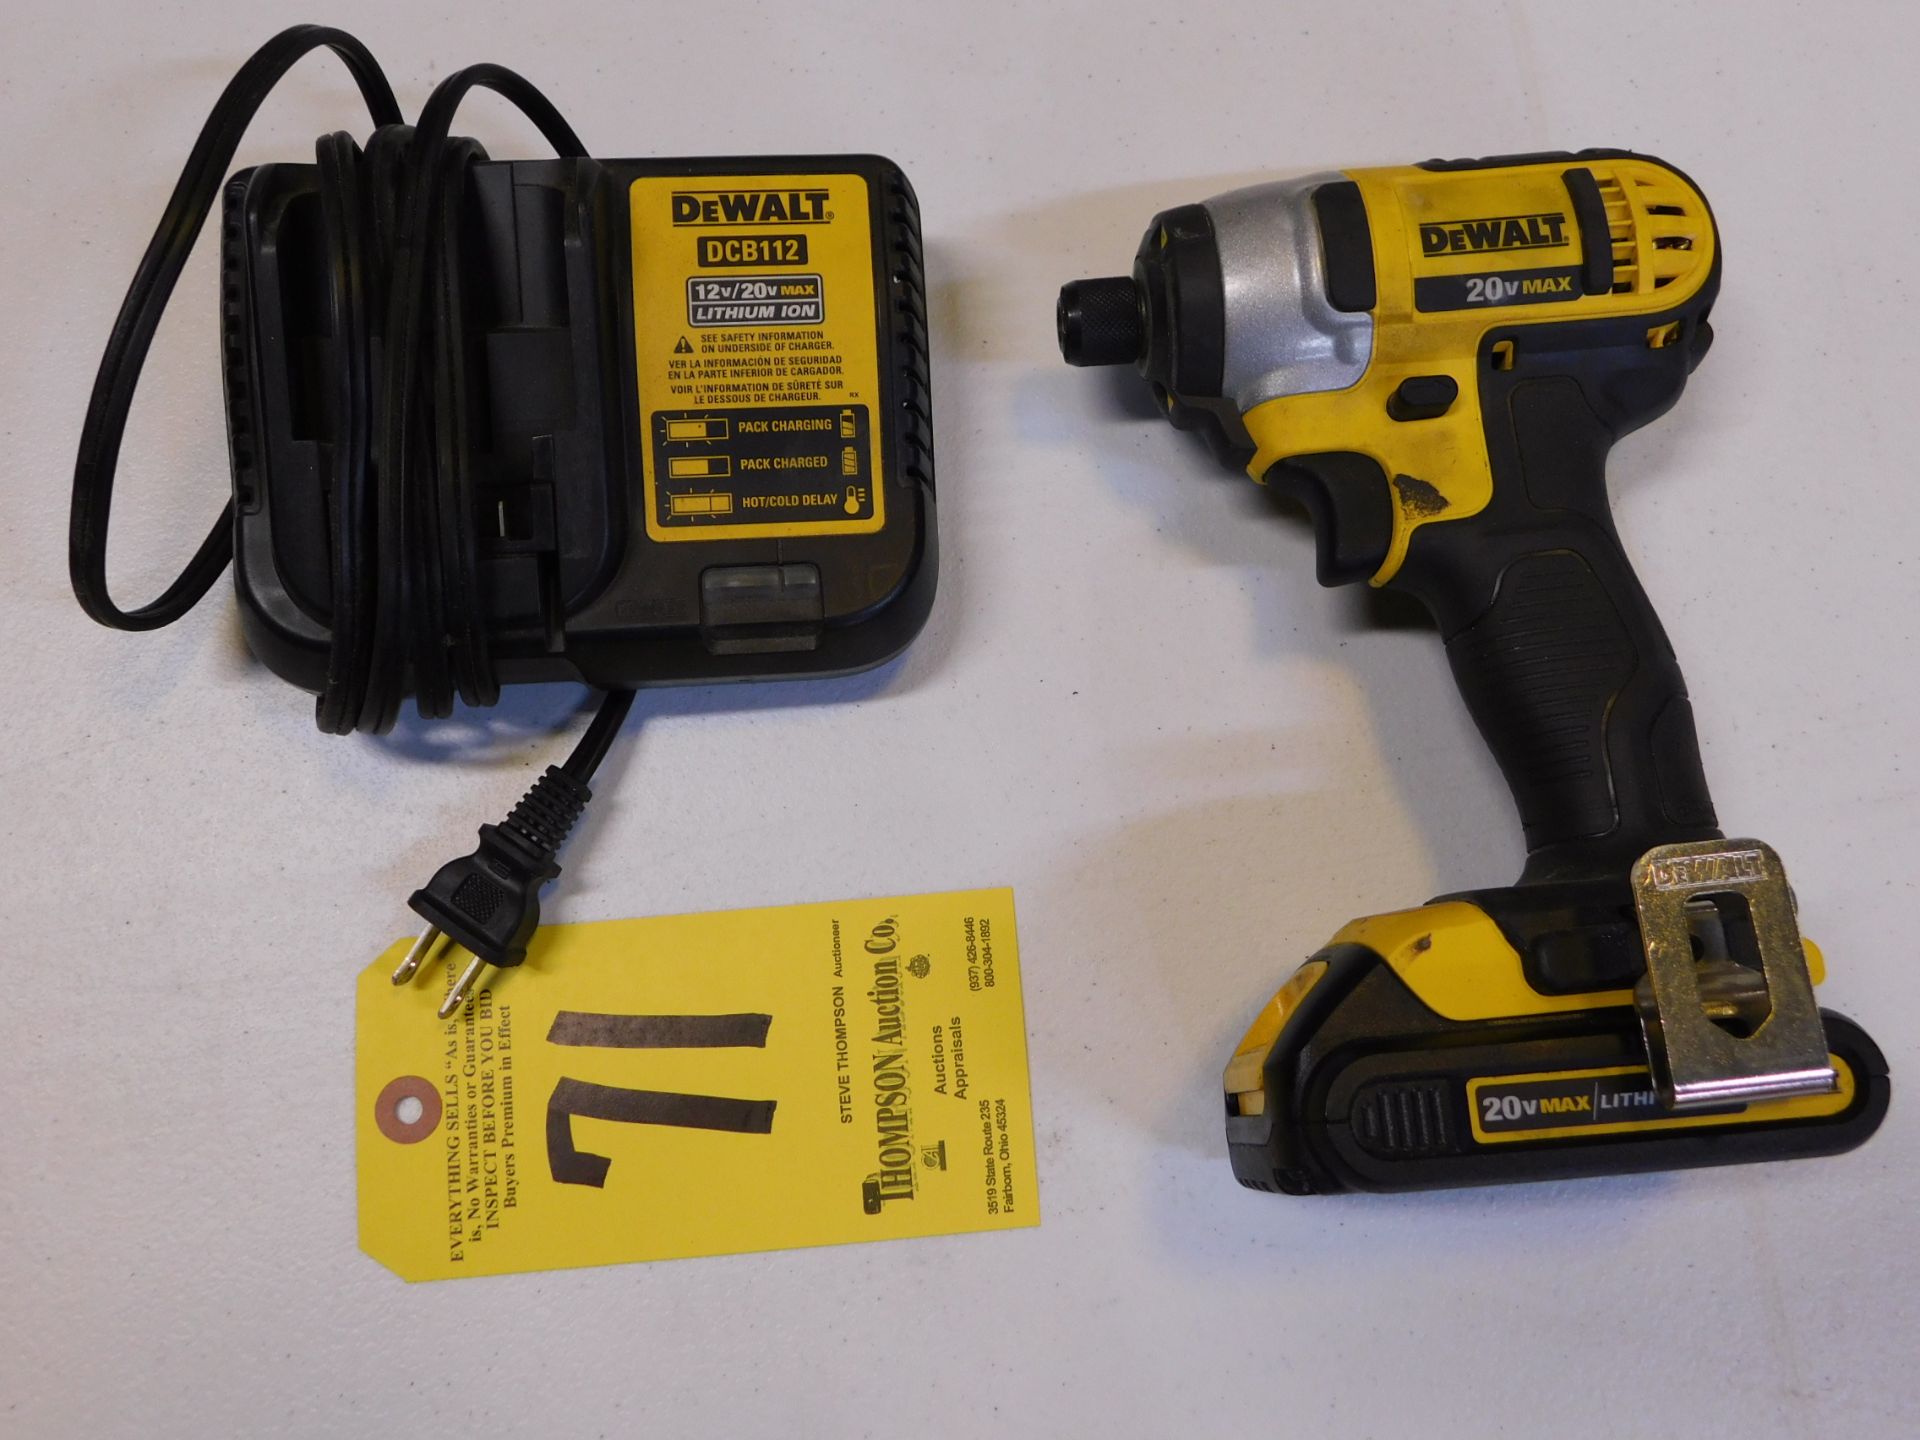 Dewalt DCF885 Cordless 20V Impact Driver with Battery and Charger, Lot Location 3204 Olympia Dr.